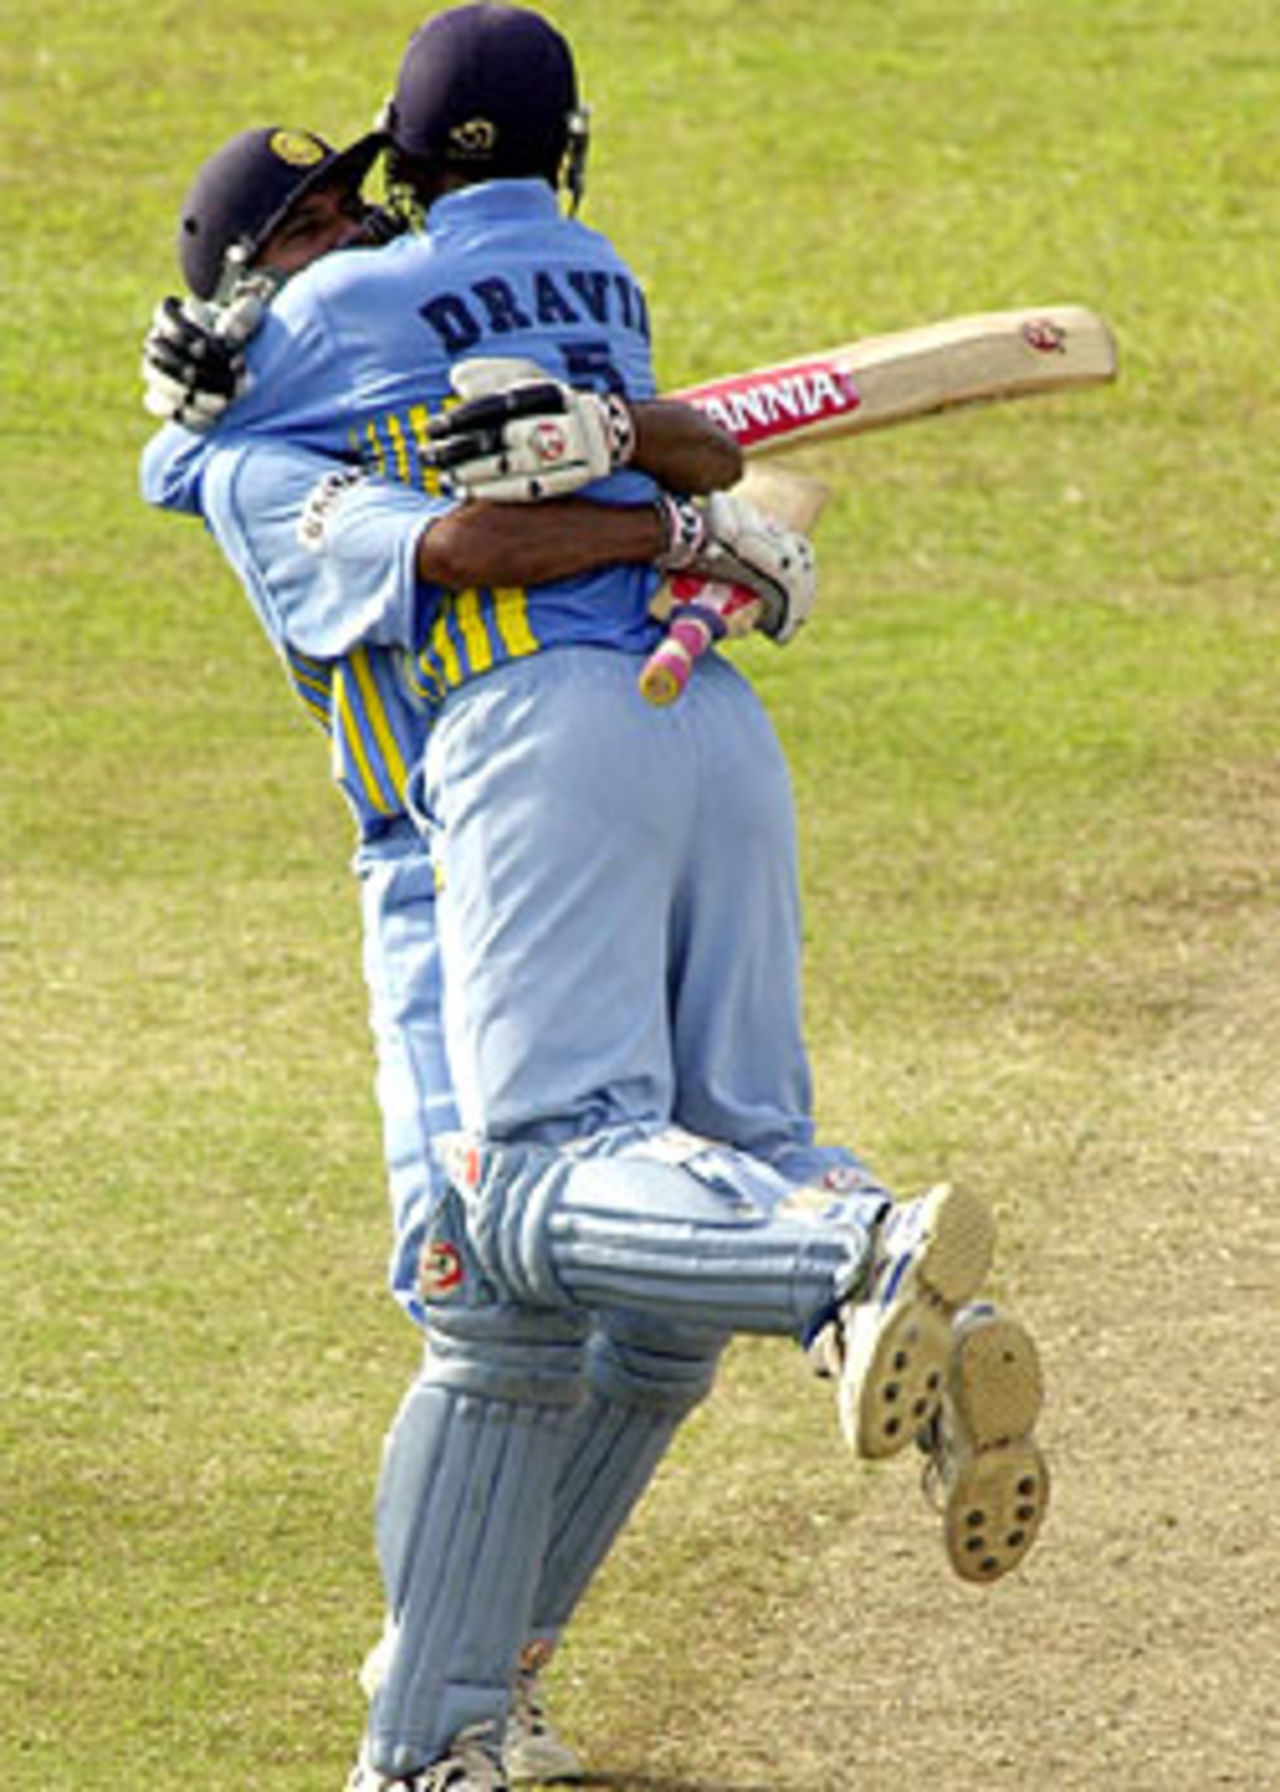 2 August 2001: Coca-Cola Cup (Sri Lanka) 2001, 9th Match, India v New Zealand, Sinhalese Sports Club, Colombo